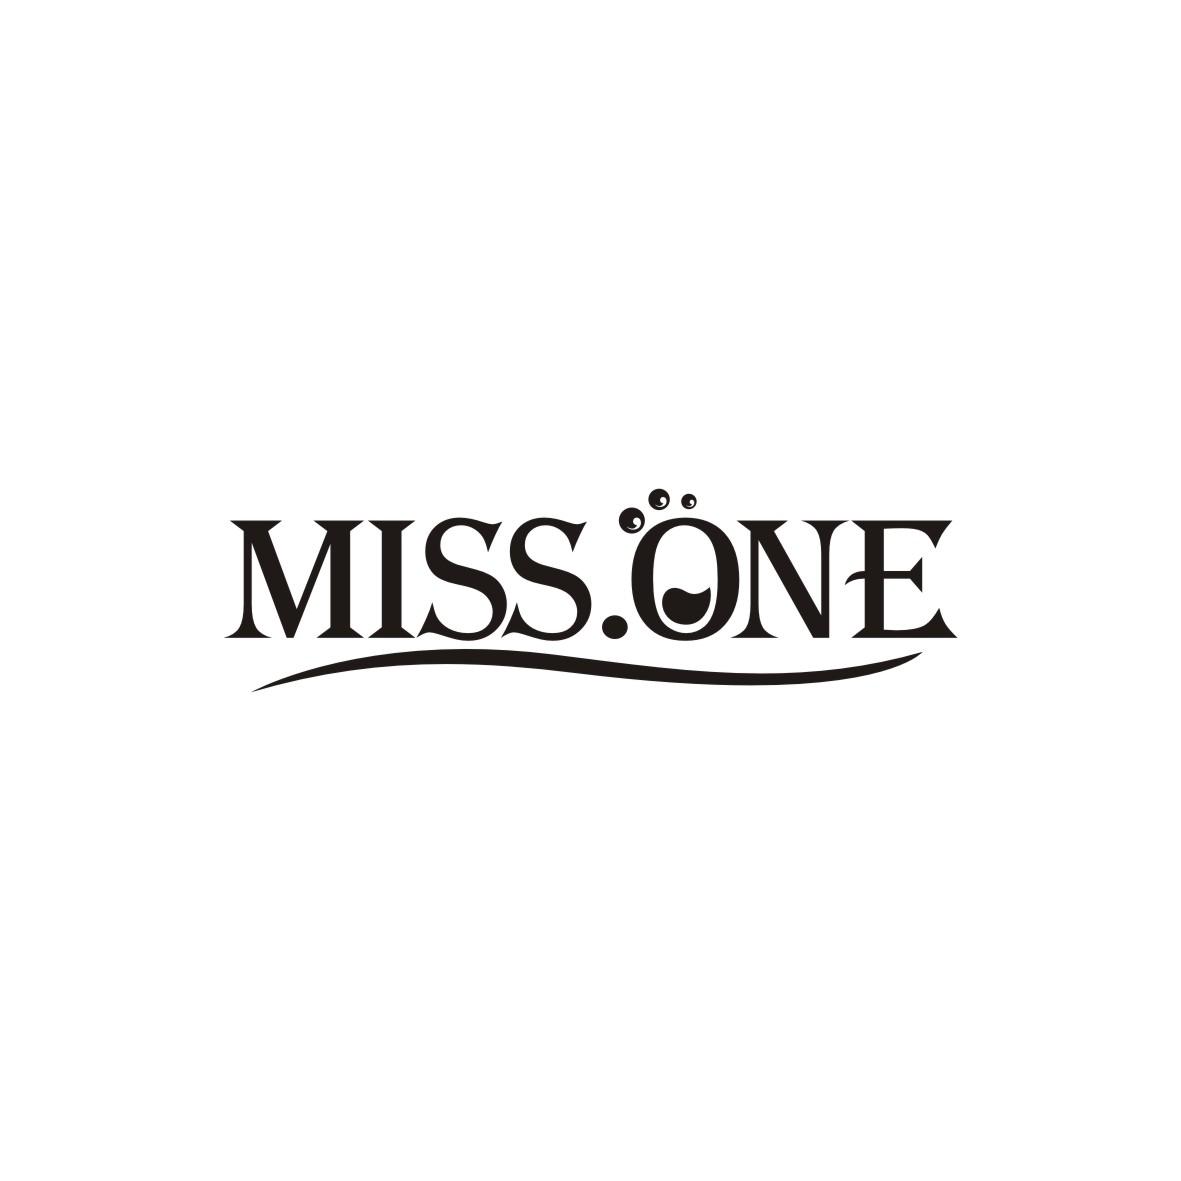 MISS.ONE